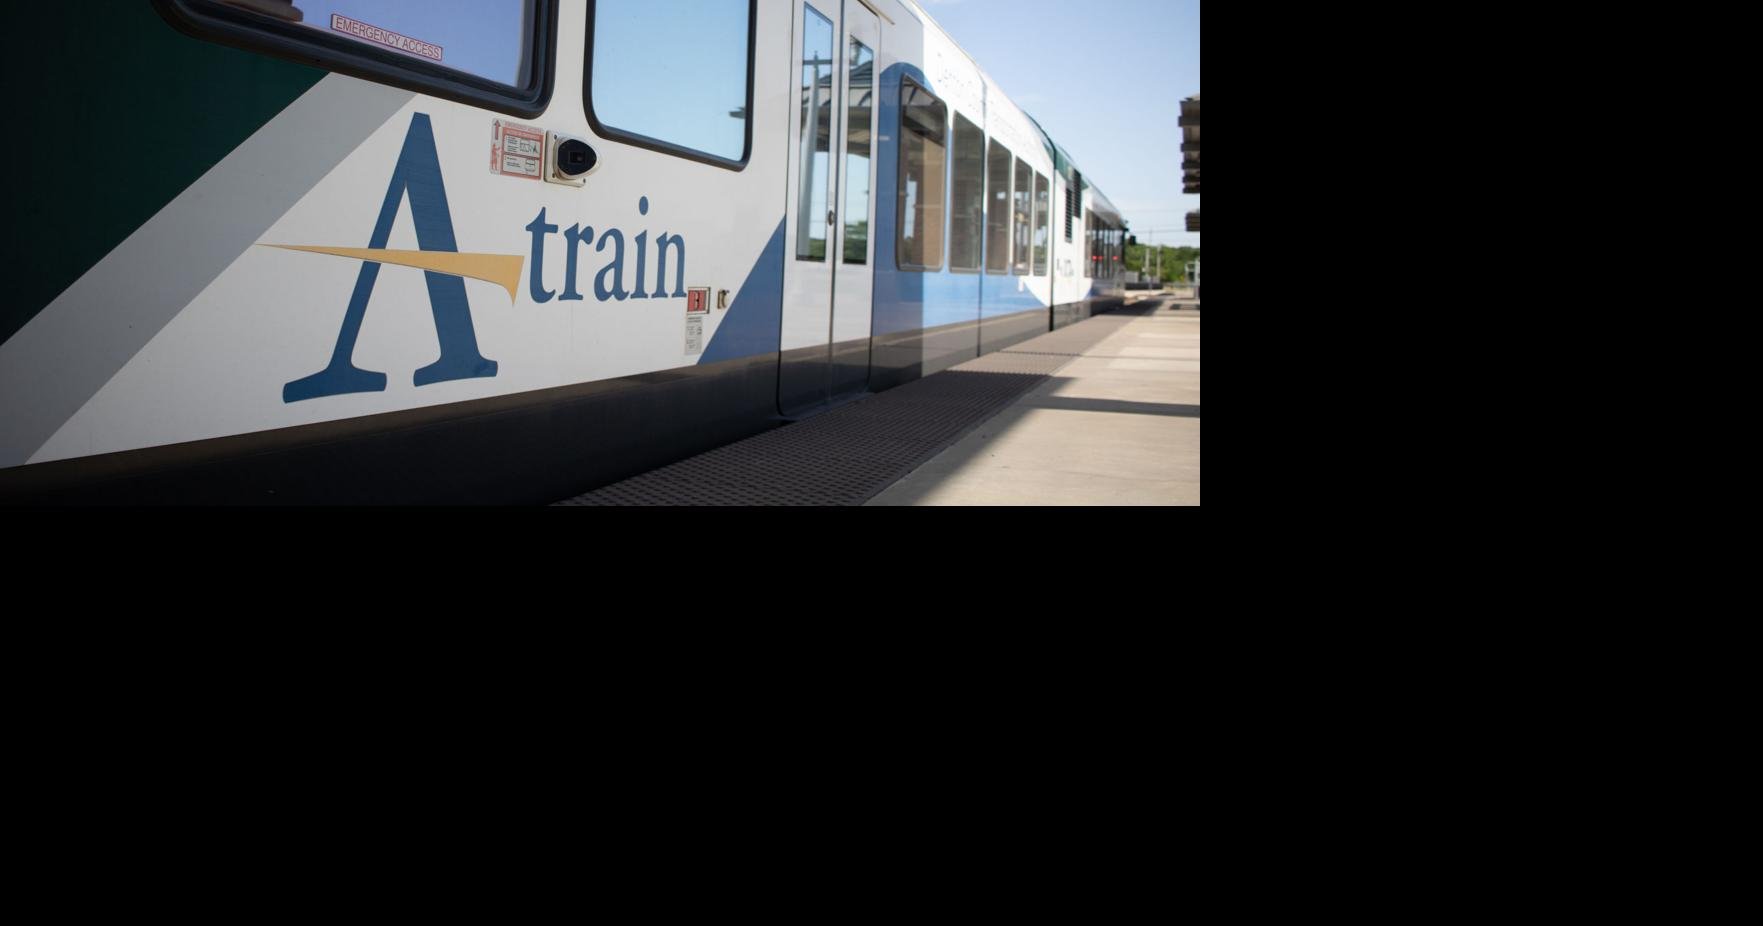 August 15 Meeting - DART and the Cotton Belt Line